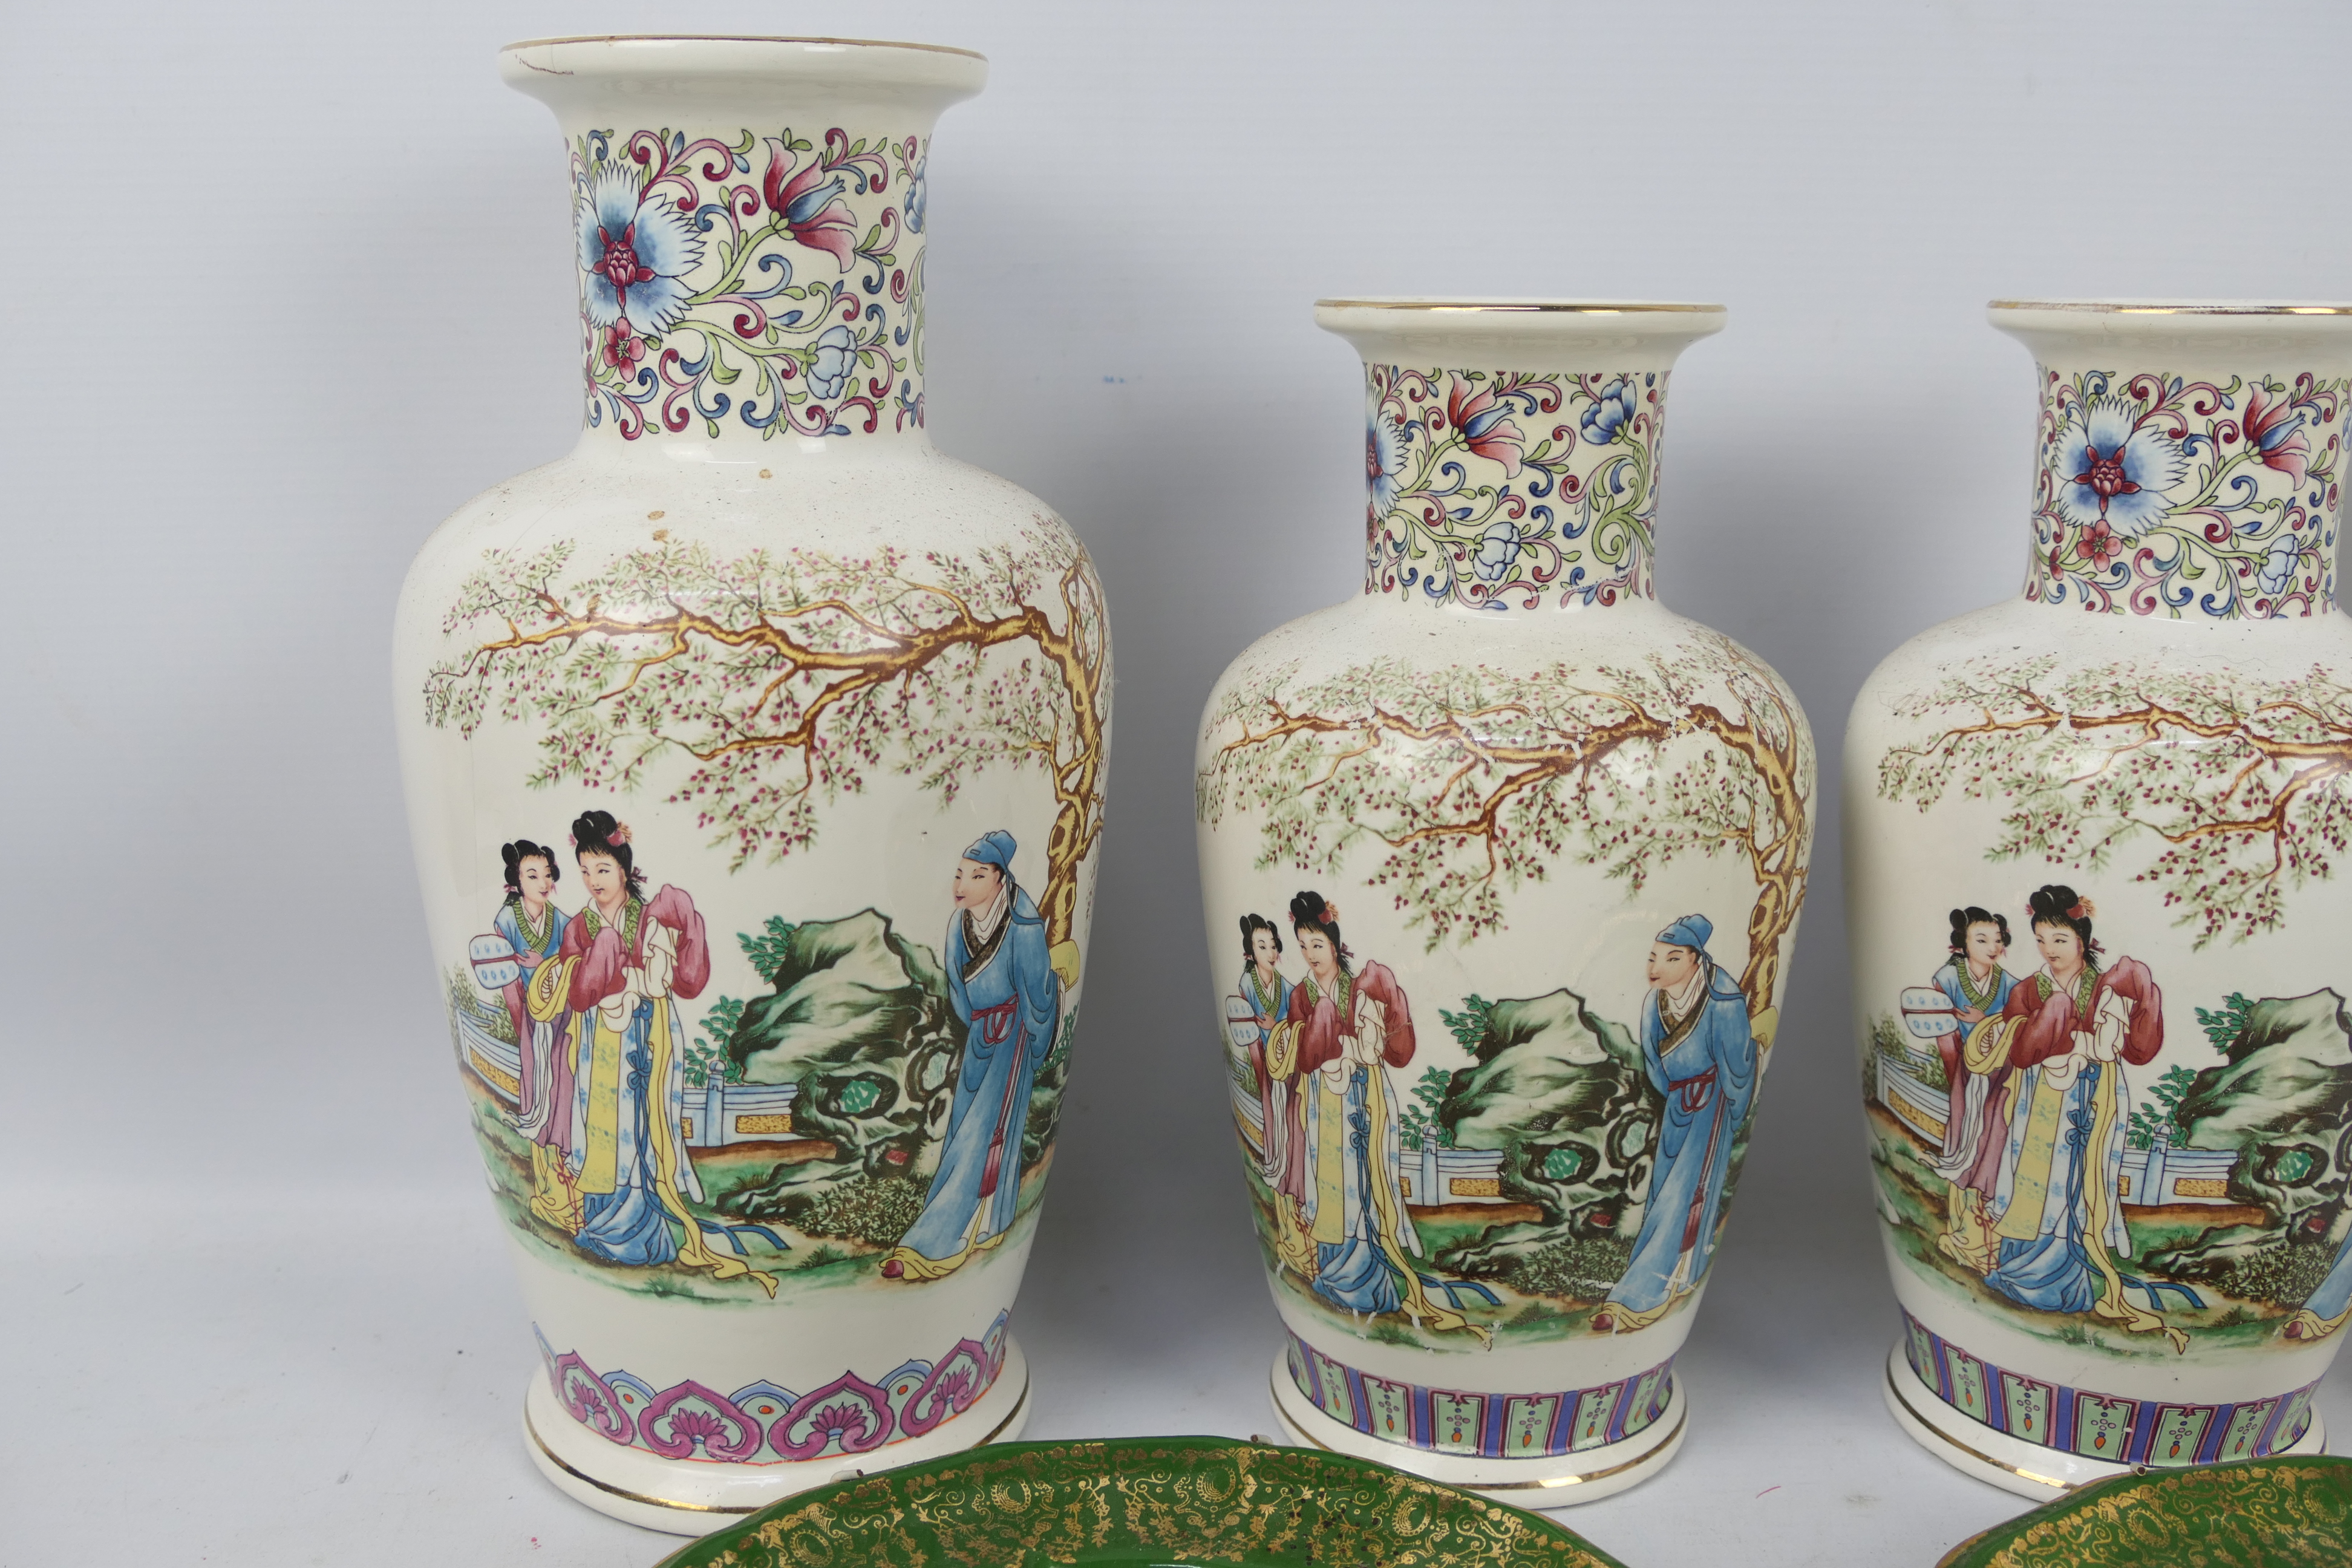 Three Chinese vases, largest approximately 30 cm (h), a Crown Ducal vase and other. - Image 2 of 9